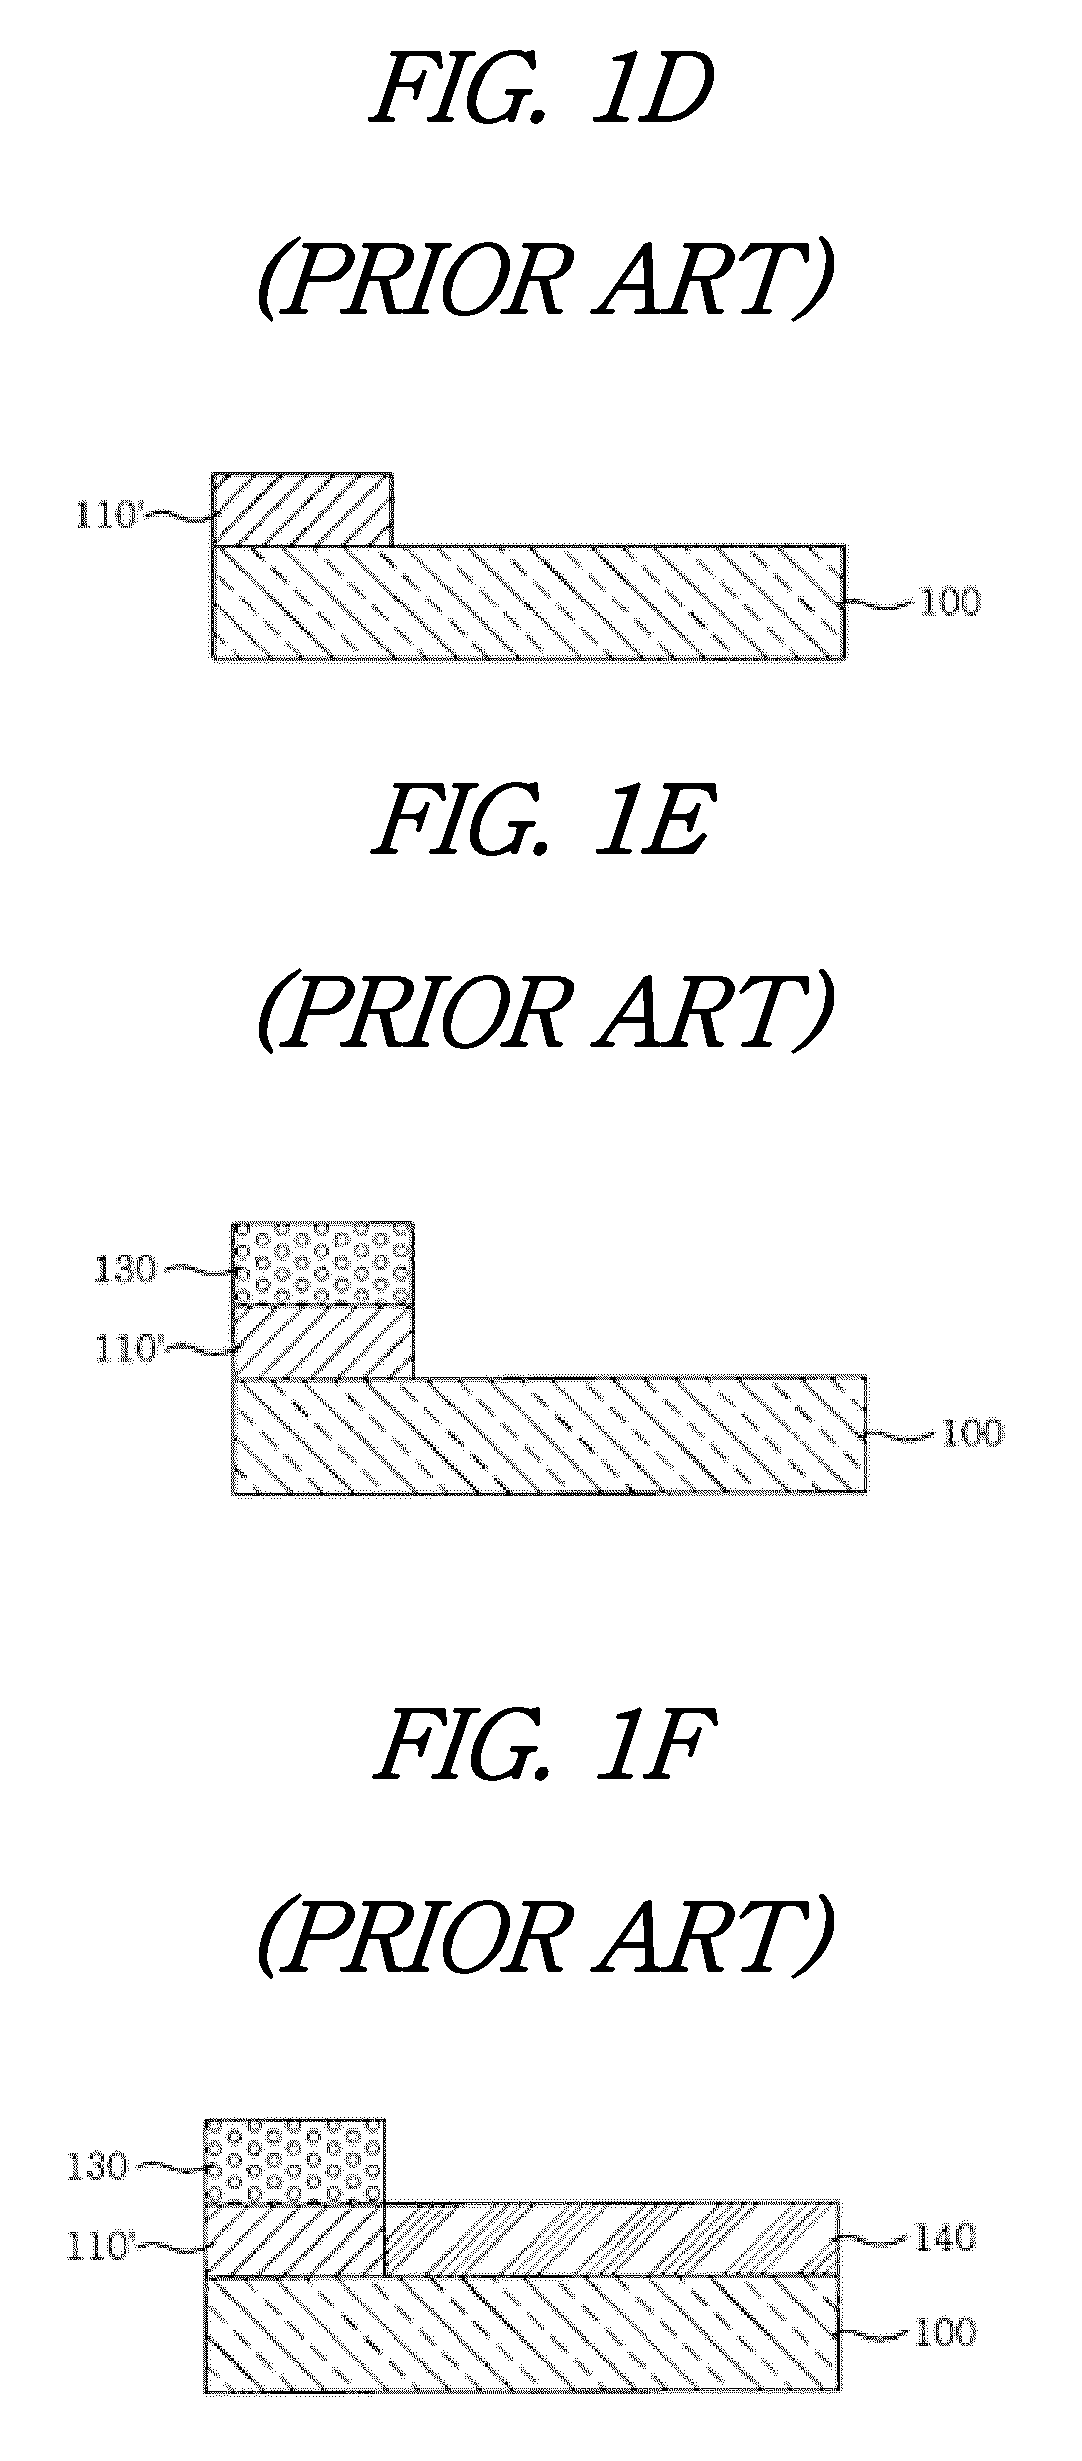 Semiconductor device having a dual gate electrode and methods of making the same